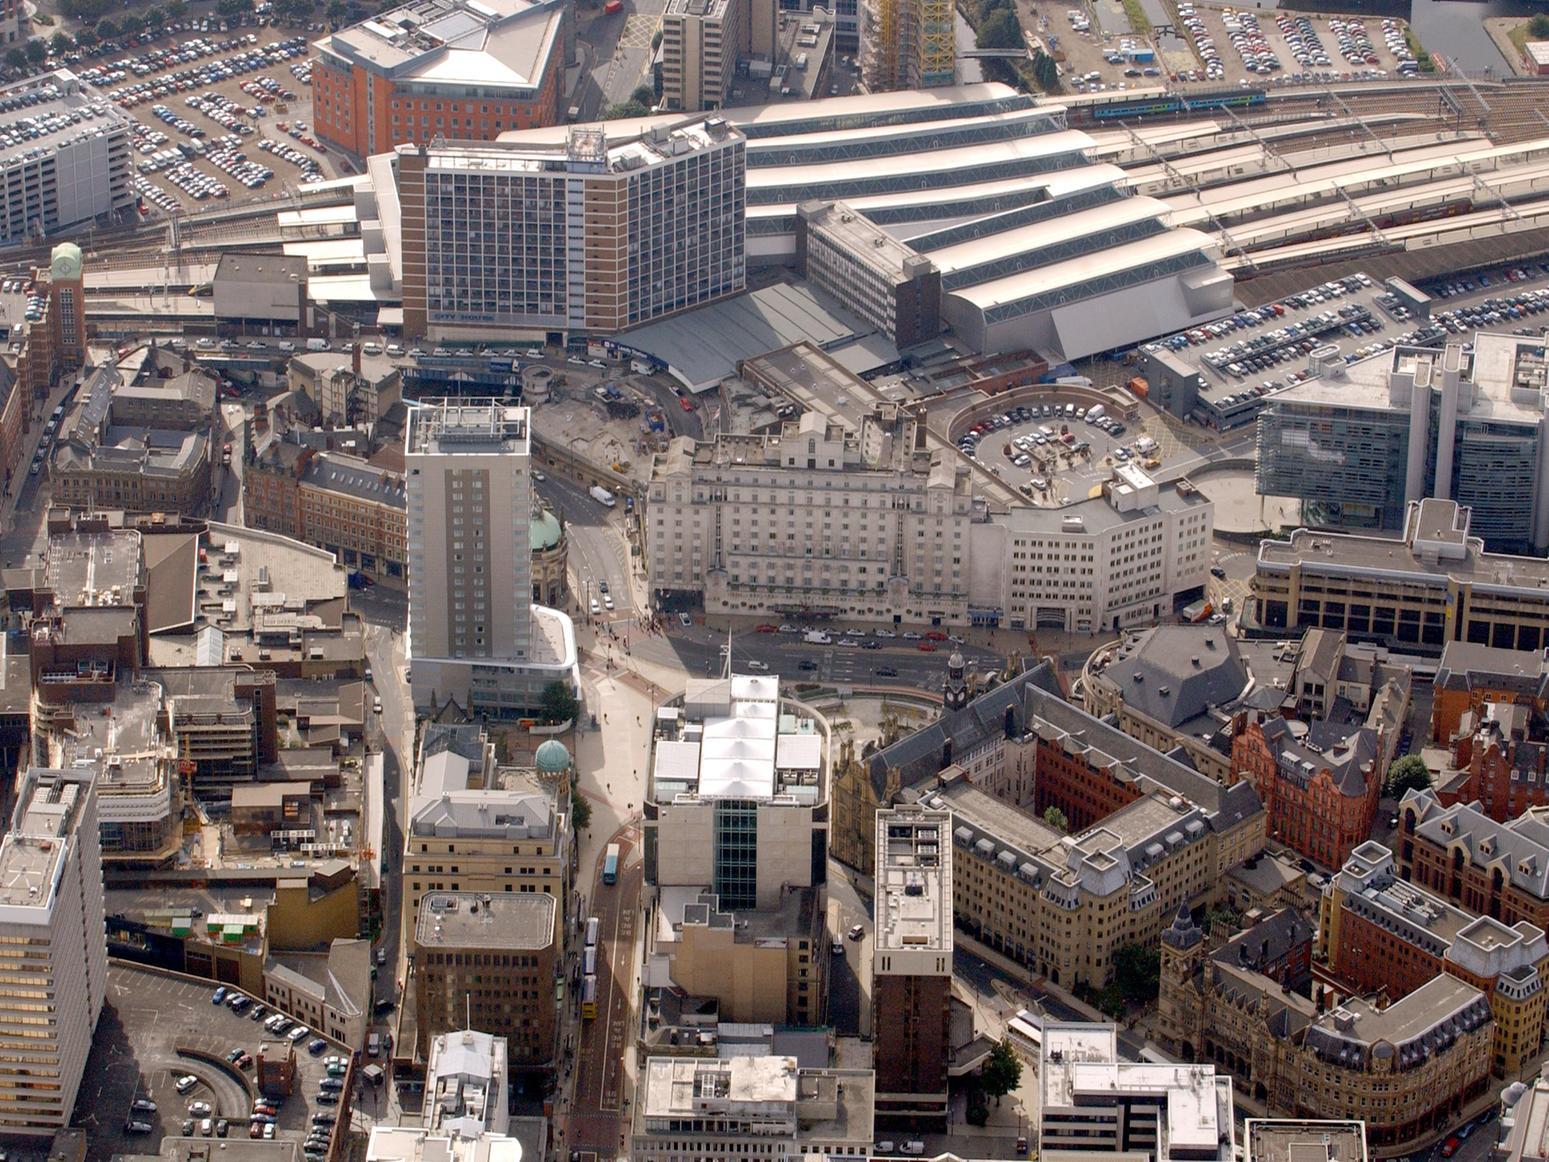 City Square, the Queens Hotel and Leeds City Station are three landmarks which stand out on this photo.